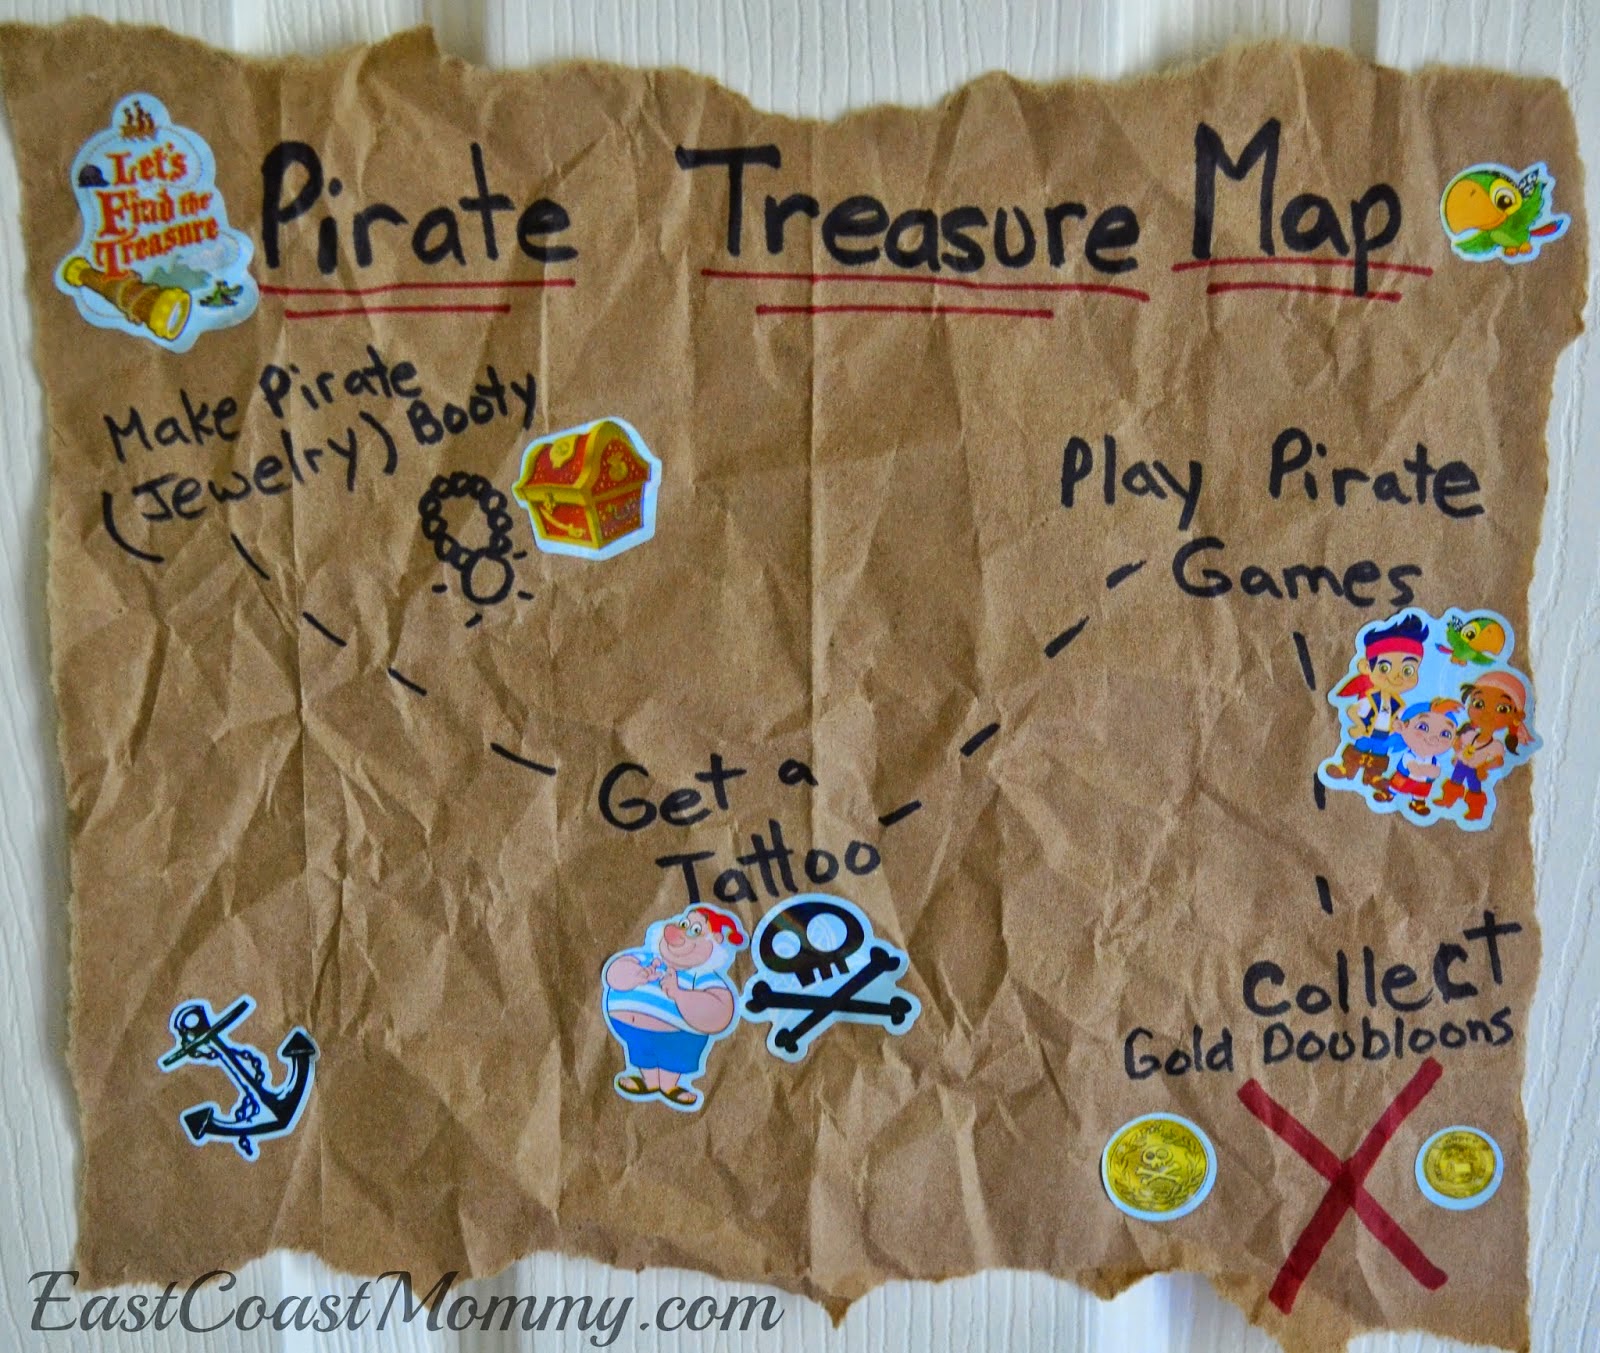 East Coast Mommy: Jake and the Neverland Pirates Party Games